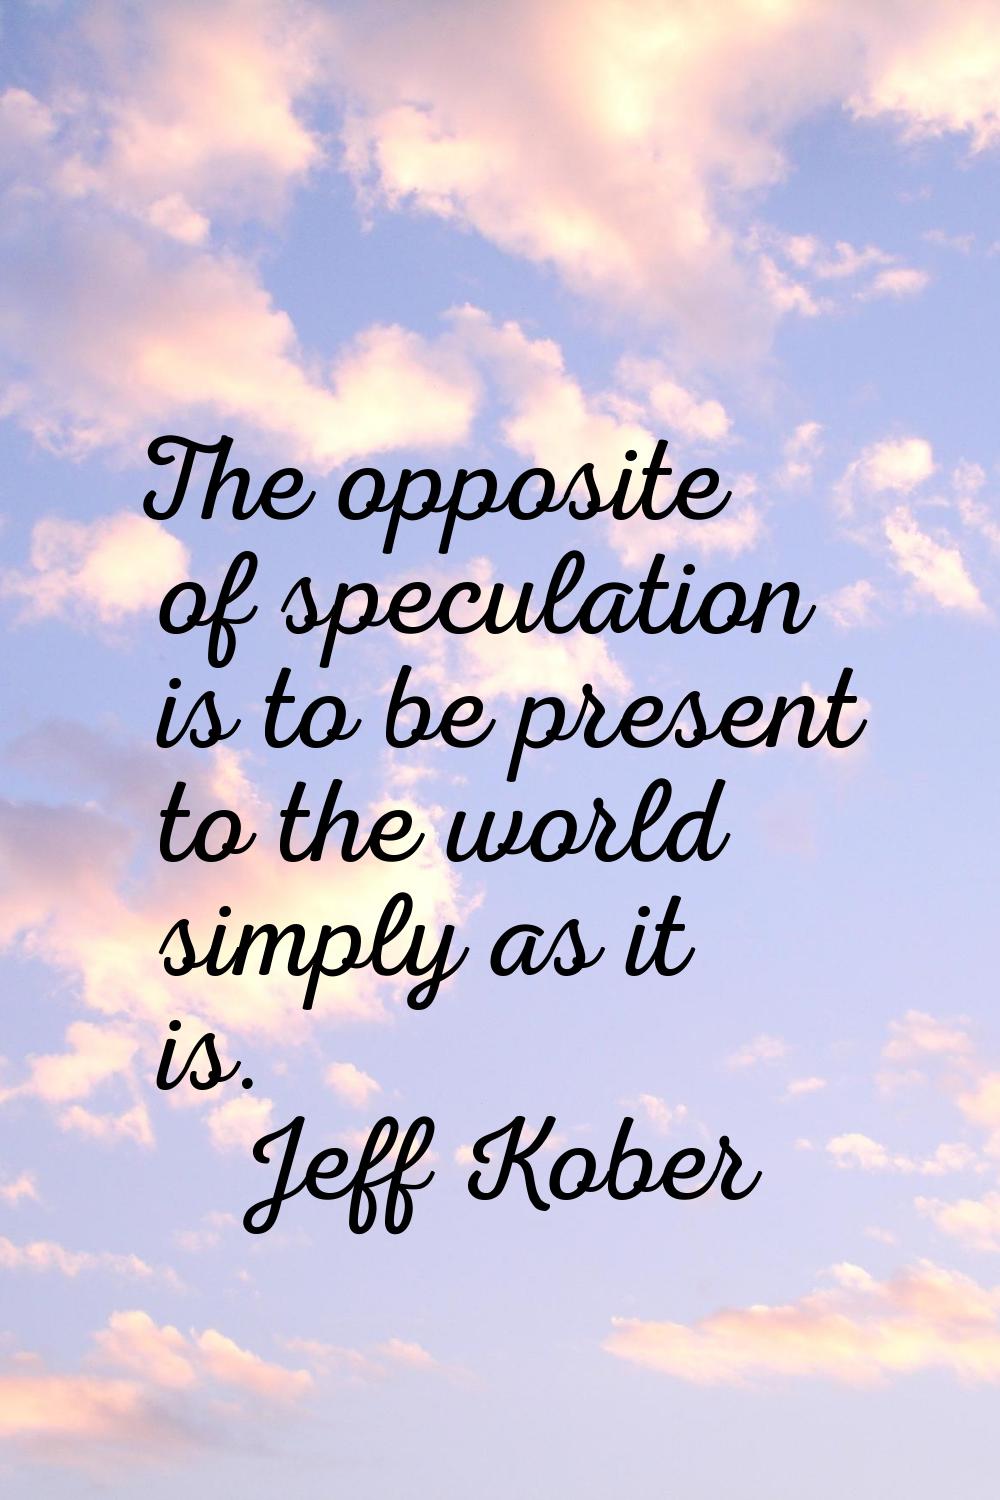 The opposite of speculation is to be present to the world simply as it is.